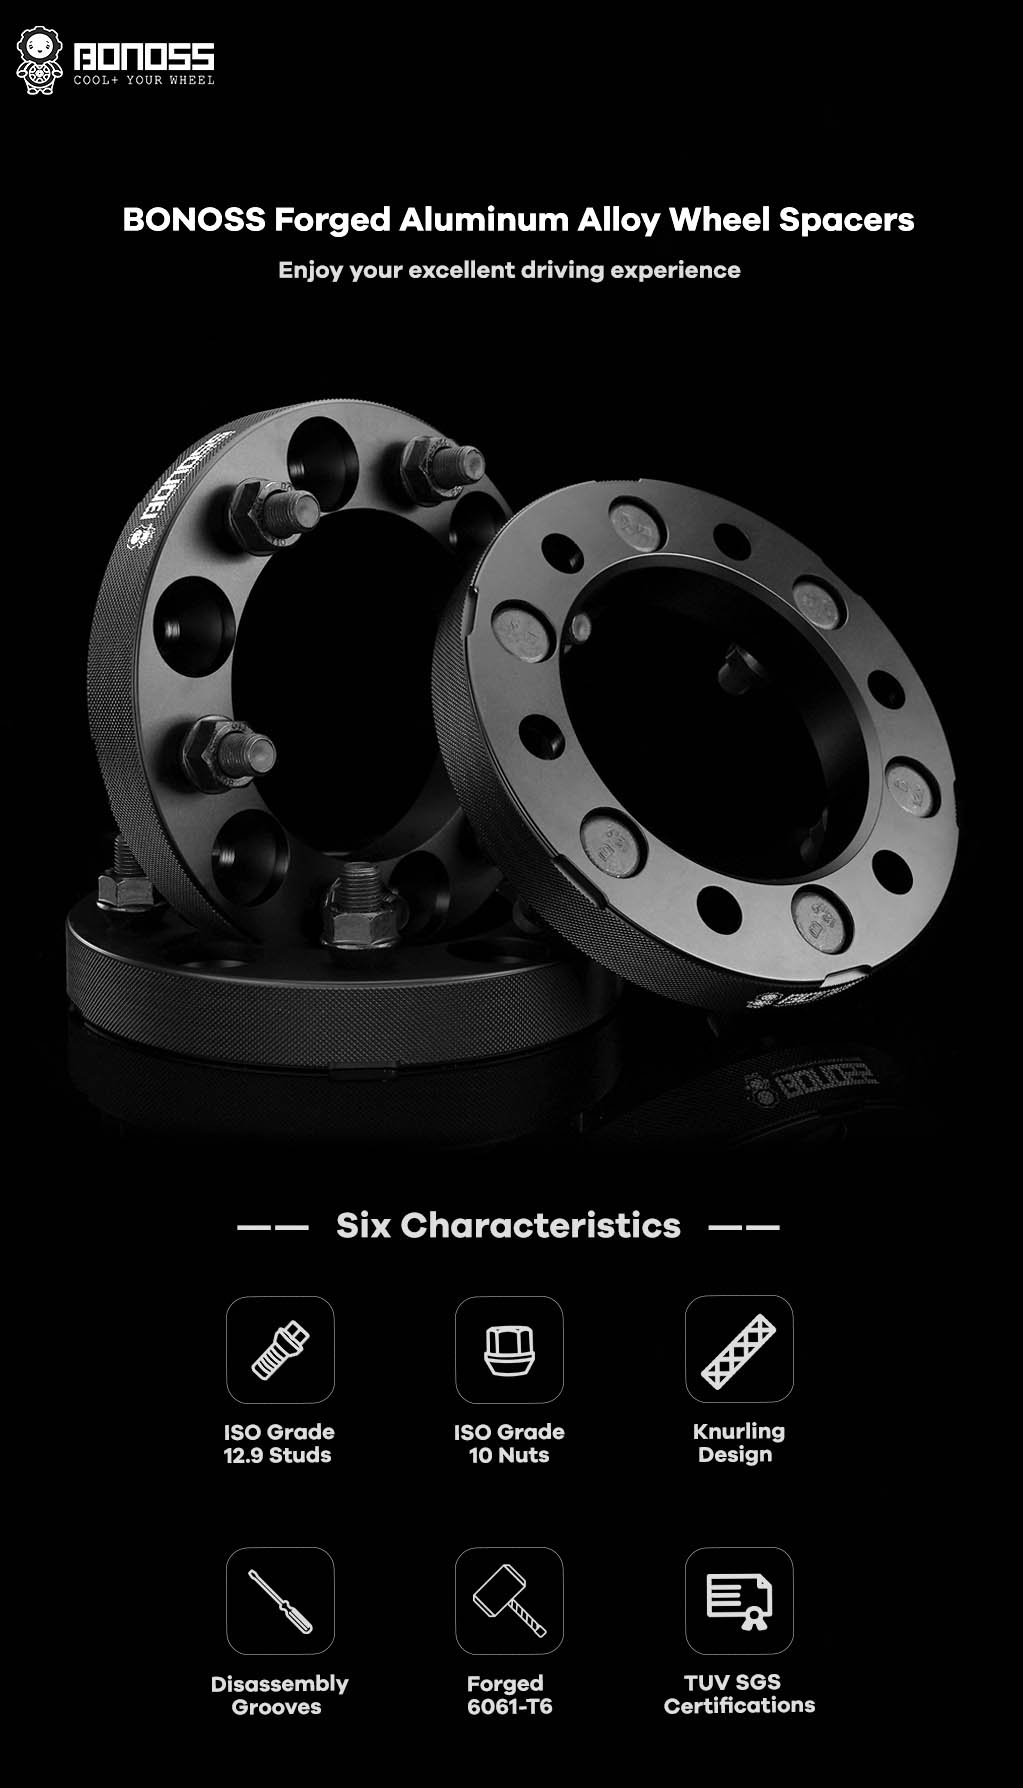 AL6061-T6 BONOSS-forged-active-cooling-wheel-spacer-6X139.7-110-for ISUZU Trooper-by-lulu-1